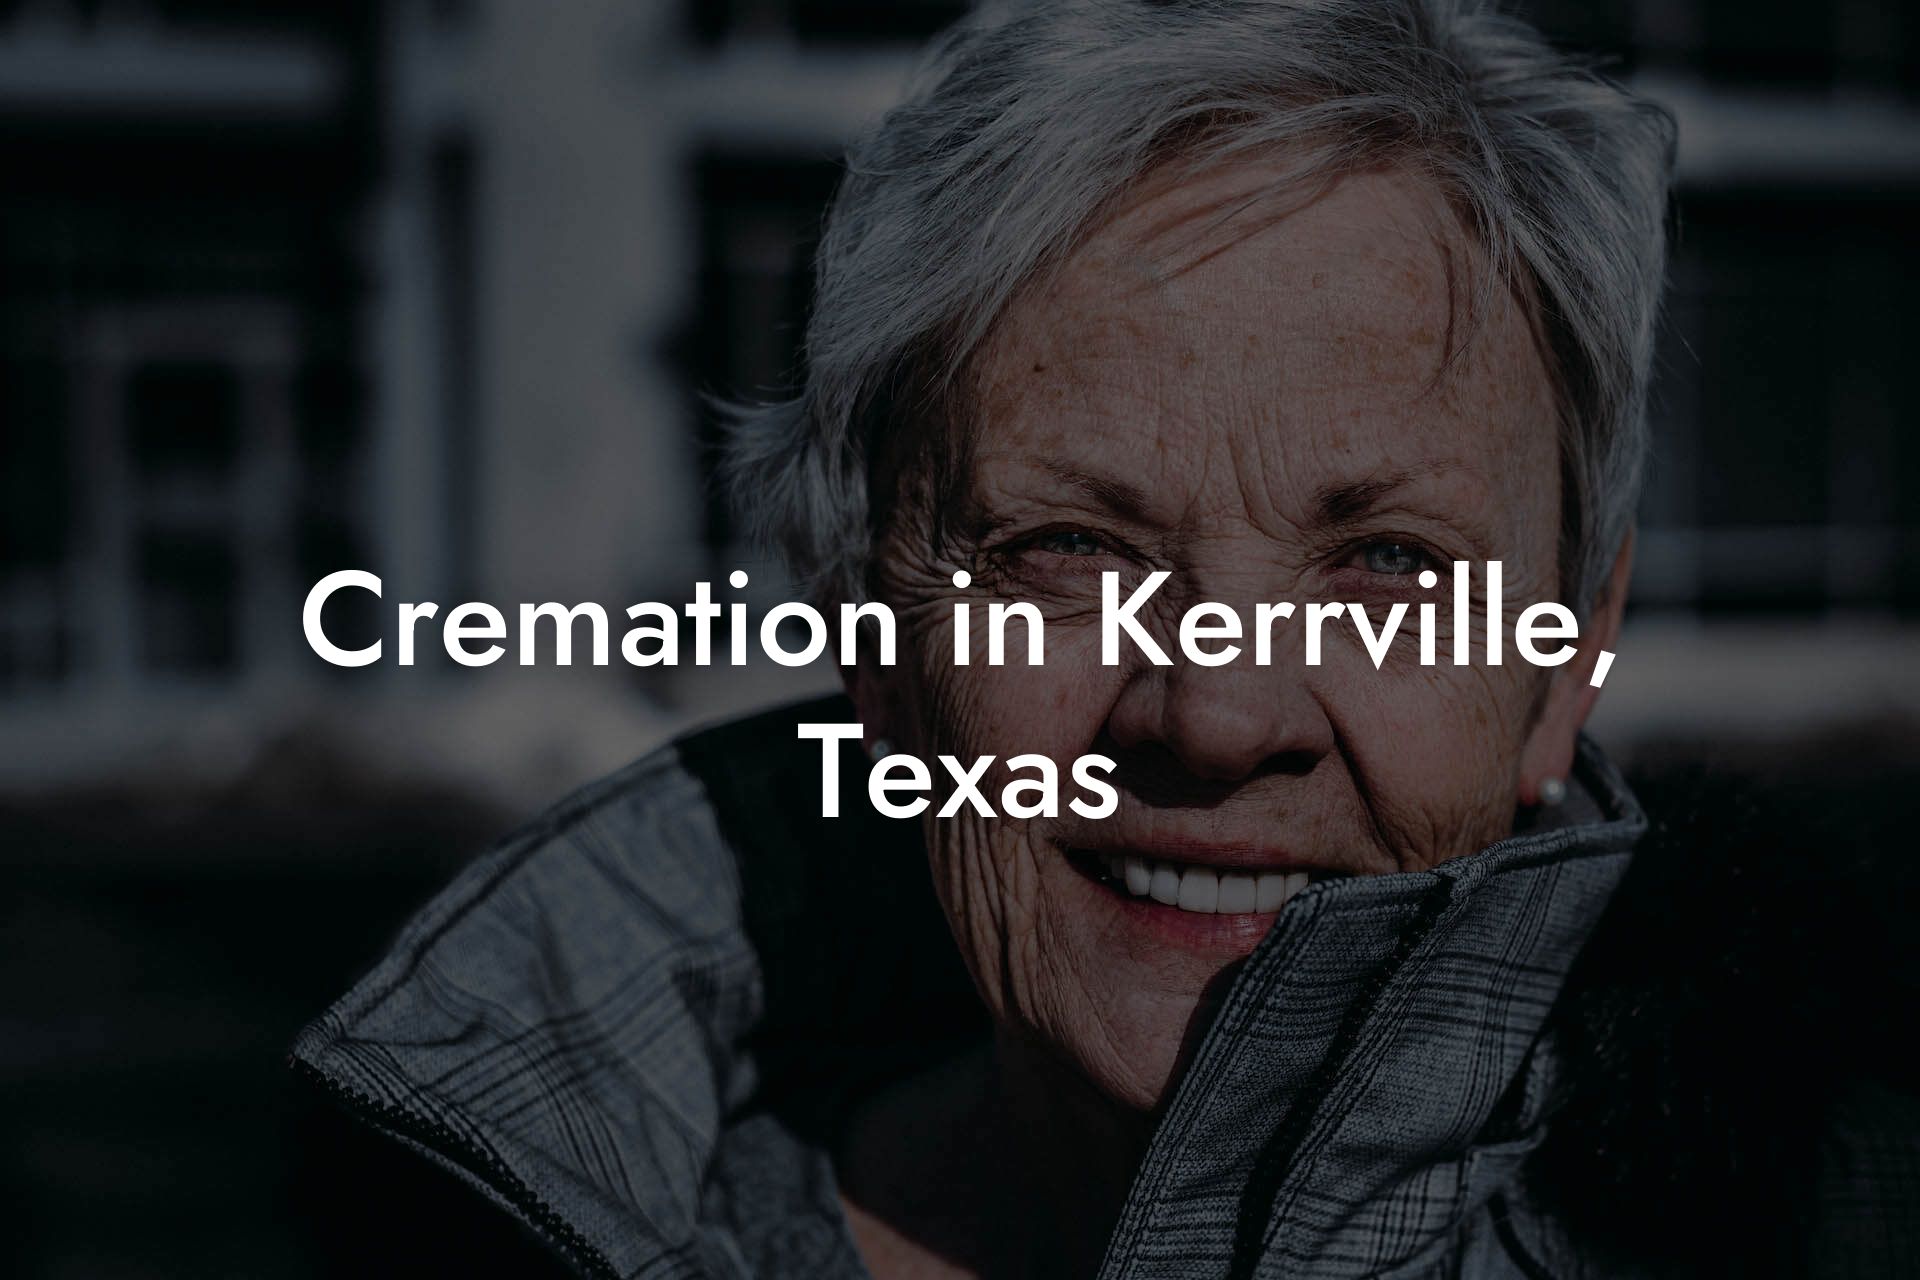 Cremation in Kerrville, Texas